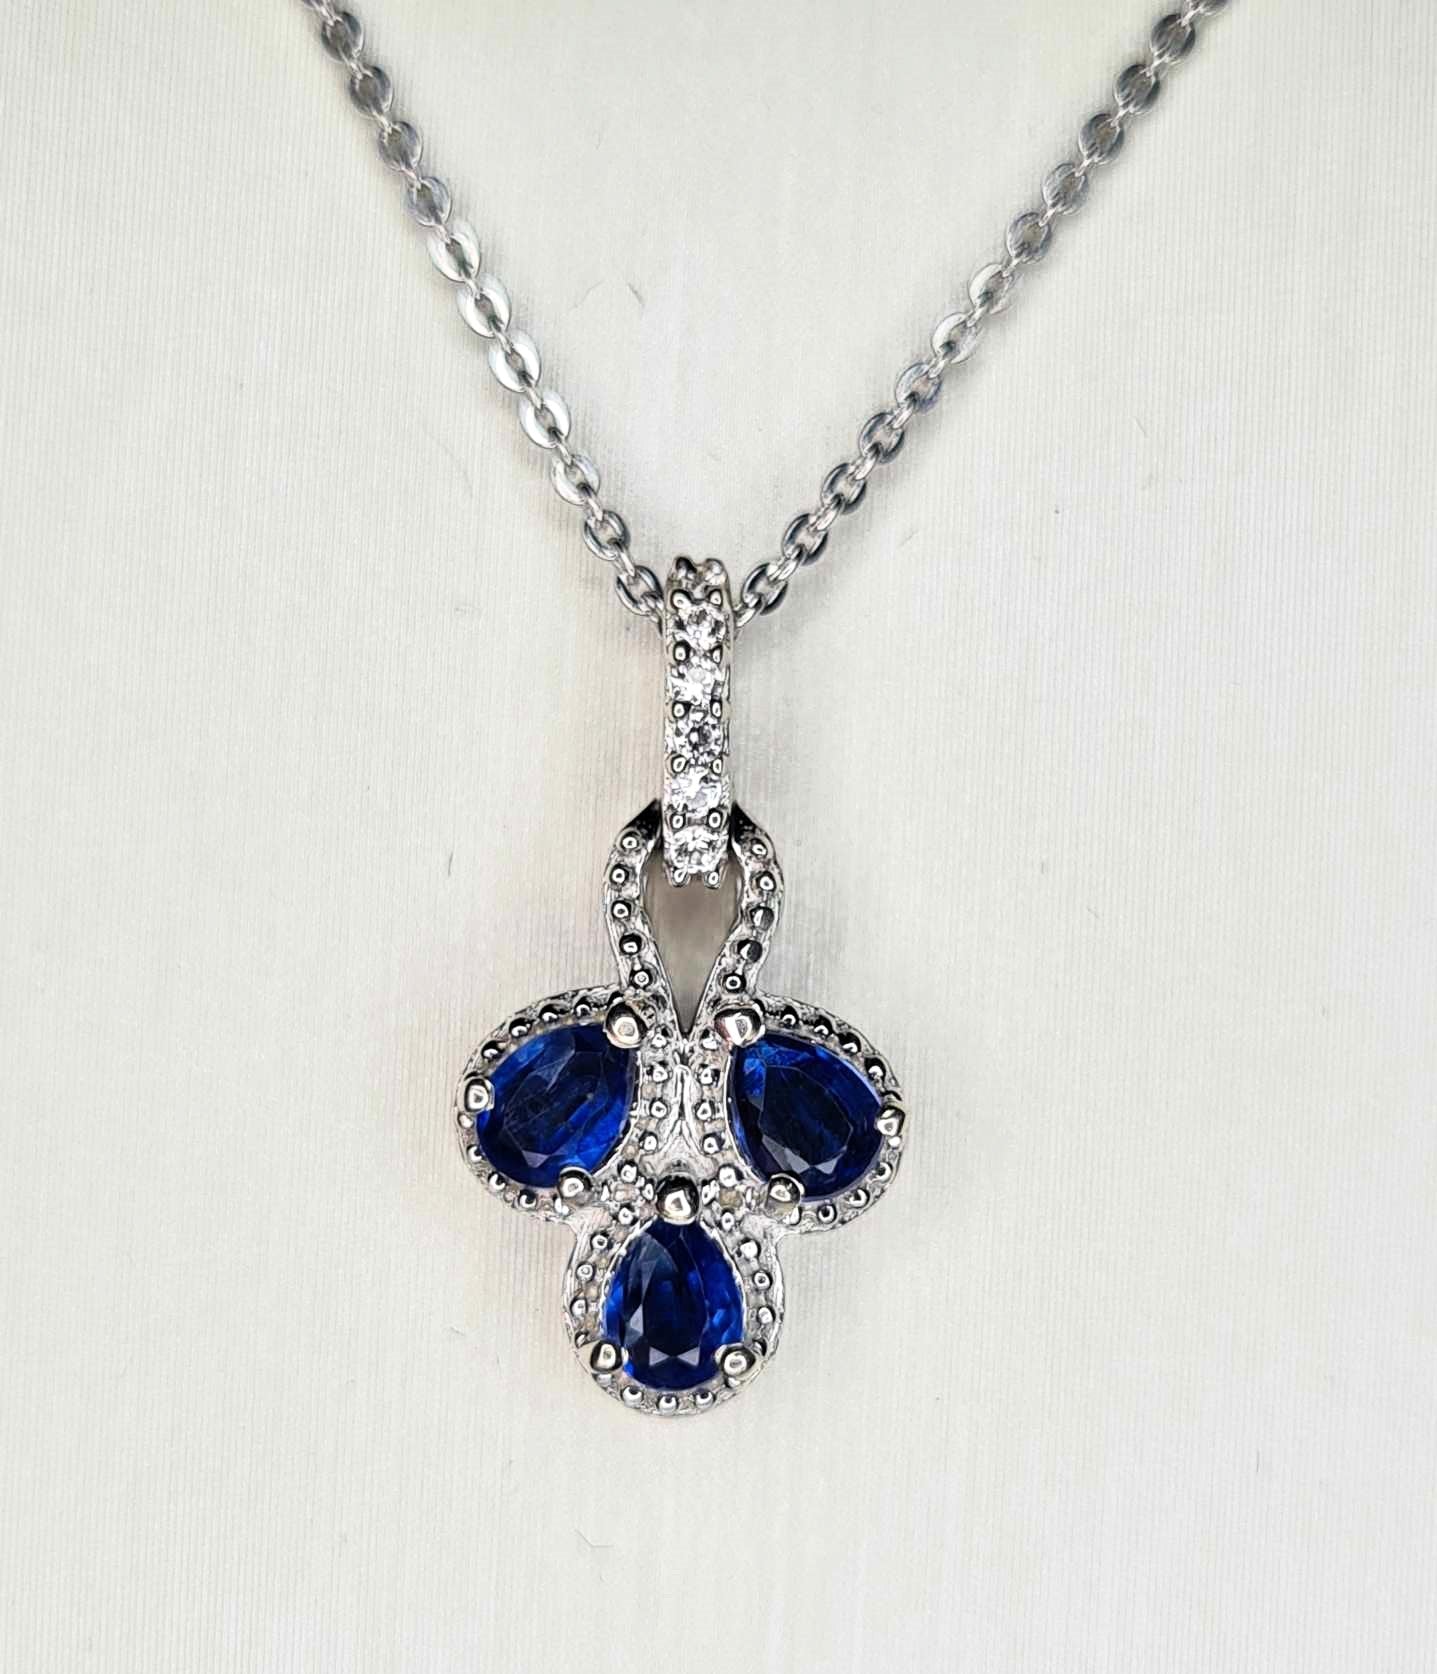 0.660ct. Natural Himalayan Kyanite & White Zircon Necklace 925 Sterling Silver